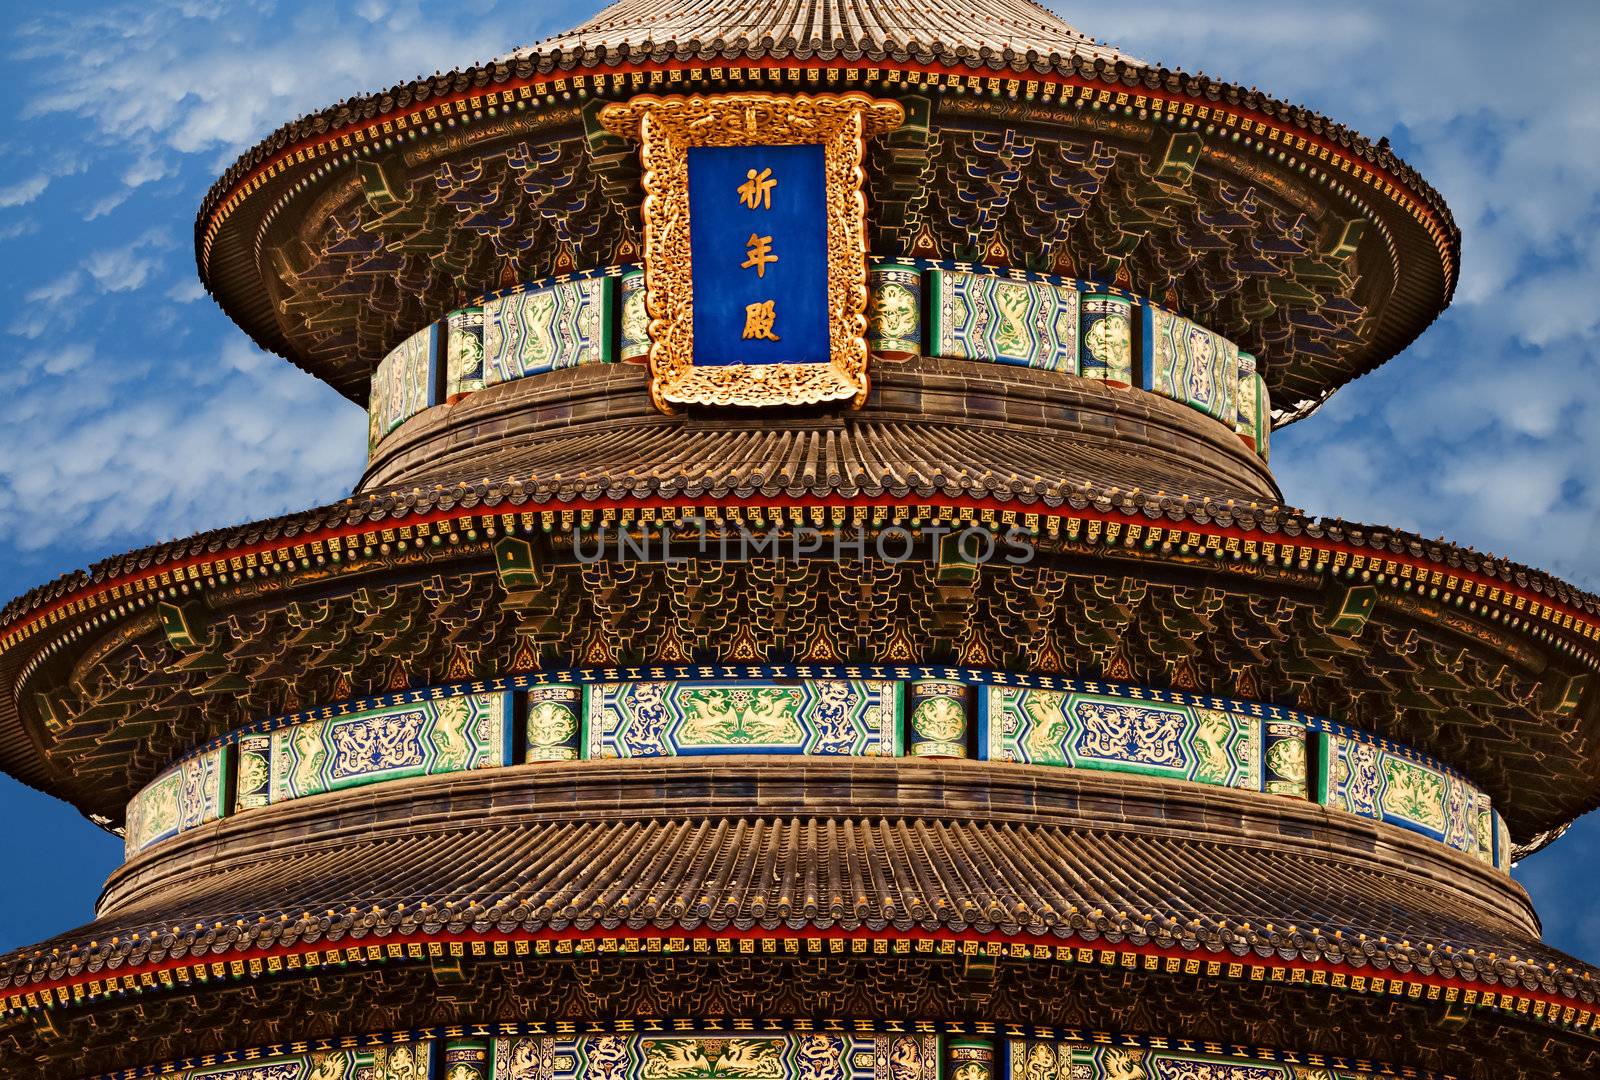 Forbidden city roof detail and the sky, Beijing, China